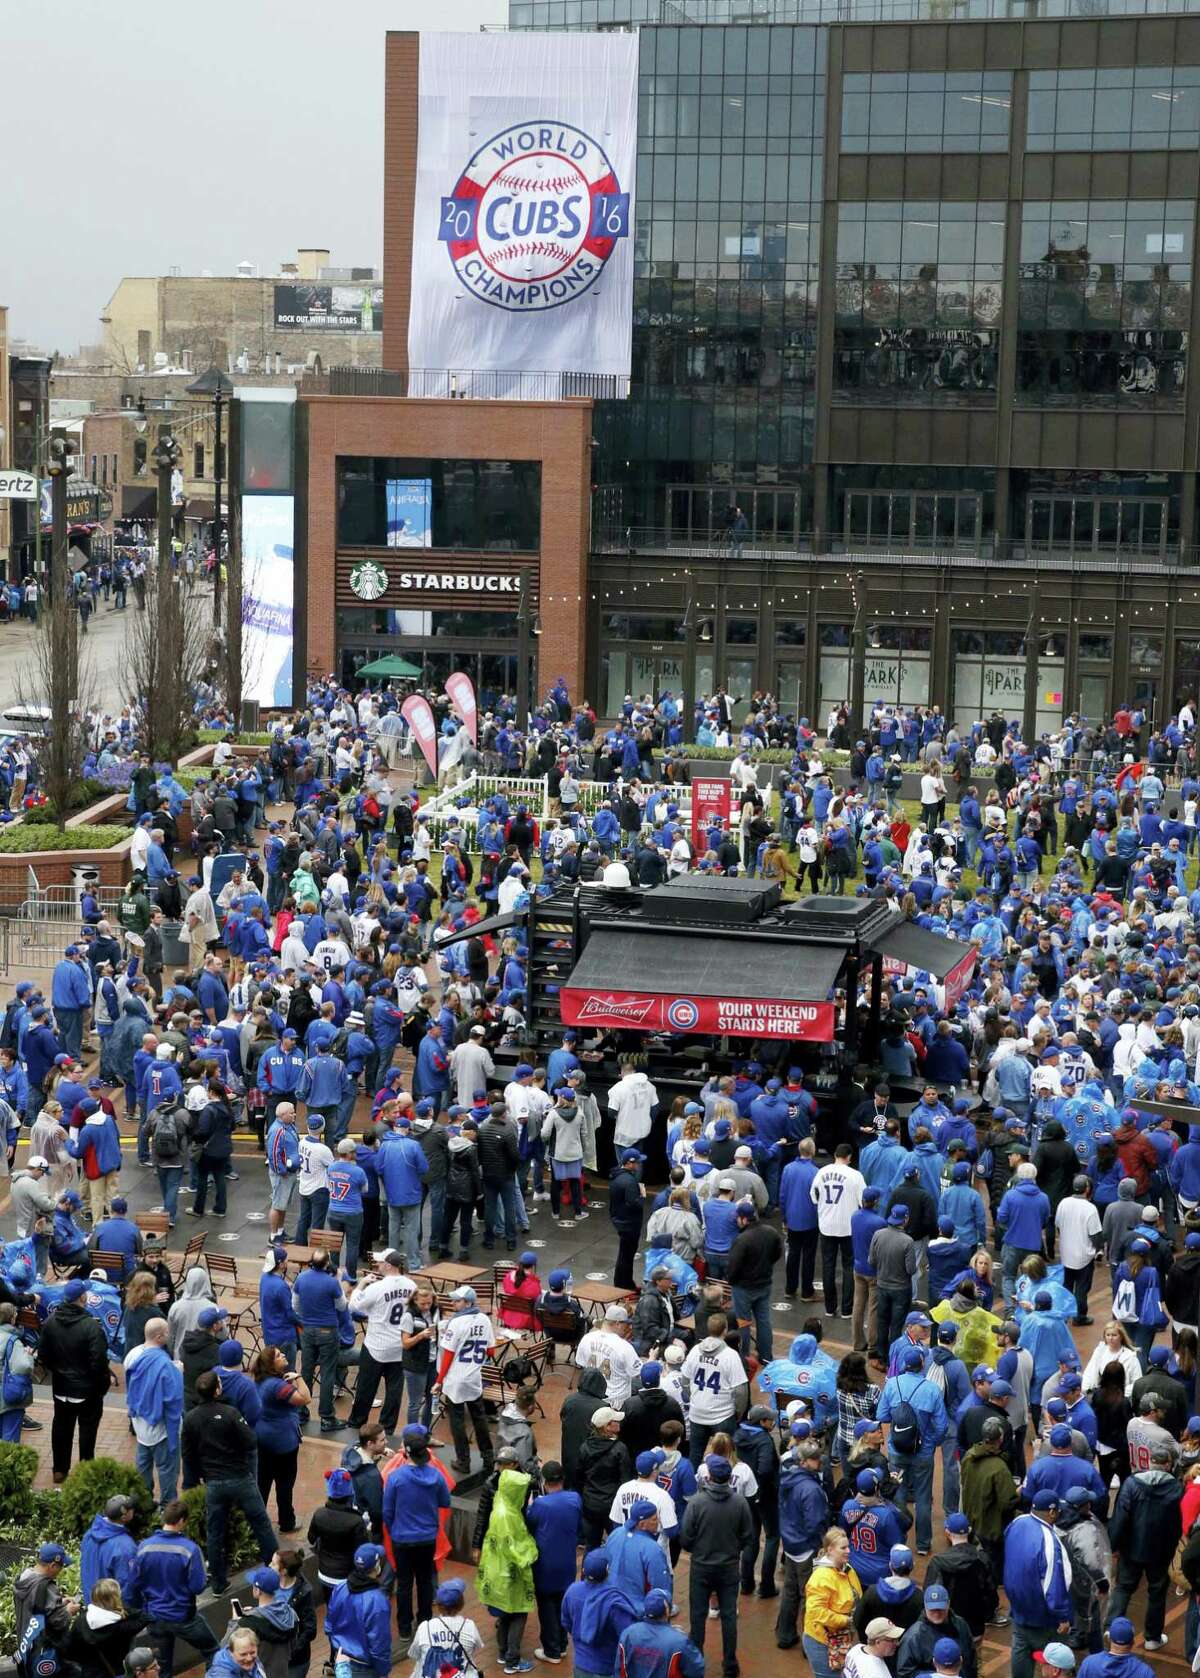 Fans gather outside in the Park at Wrigley before a baseball game between the Chicago Cubs and the Los Angeles Dodgers on home opening day April 10, 2017 in Chicago.